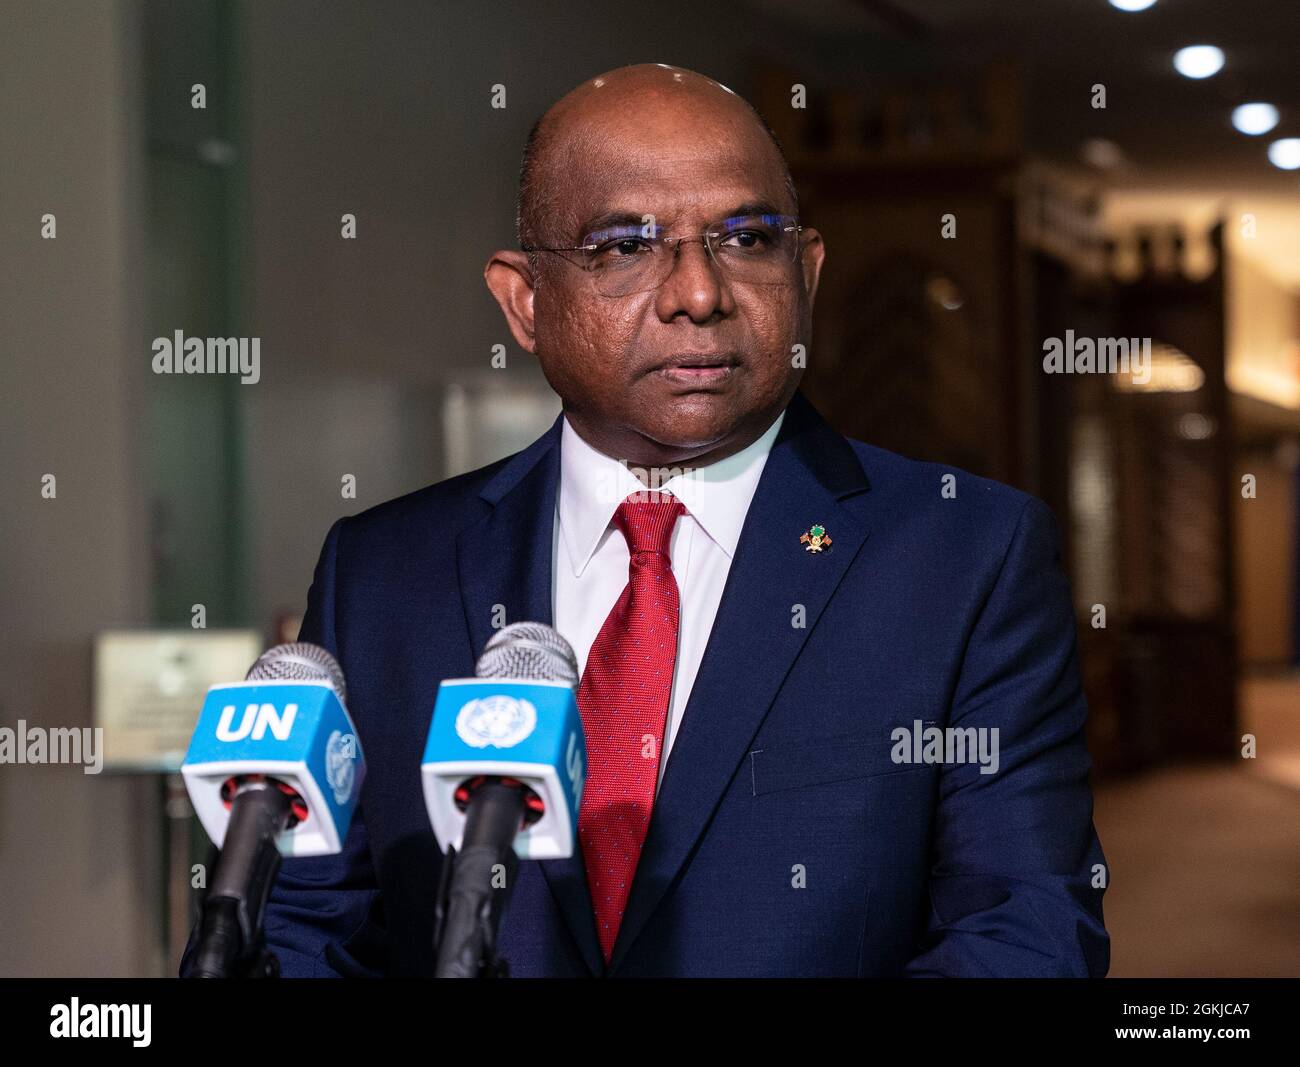 New York, USA. 14th Sep, 2021. Abdulla Shahid conducts press conference after elected as President of 76th General Assembly at UN Headquarters in New York on September 14, 2021. Abdulla Shahid is currently Minister of Foreign Affairs for the Maldives and was elected as President of 76th session of General Assembly on September 14, 2021. (Photo by Lev Radin/Sipa USA) Credit: Sipa USA/Alamy Live News Stock Photo